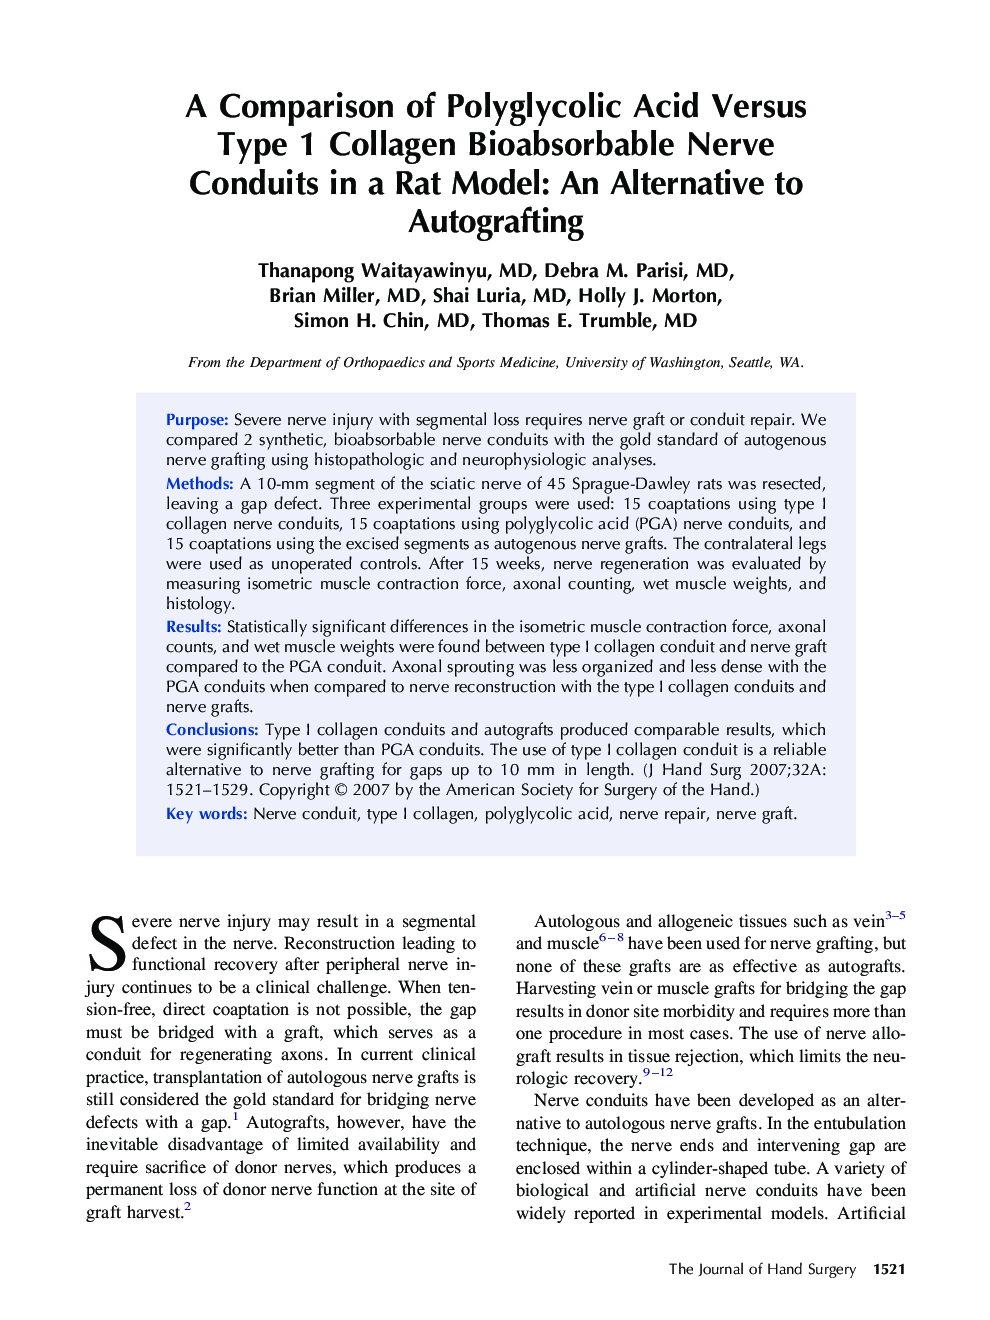 A Comparison of Polyglycolic Acid Versus Type 1 Collagen Bioabsorbable Nerve Conduits in a Rat Model: An Alternative to Autografting 